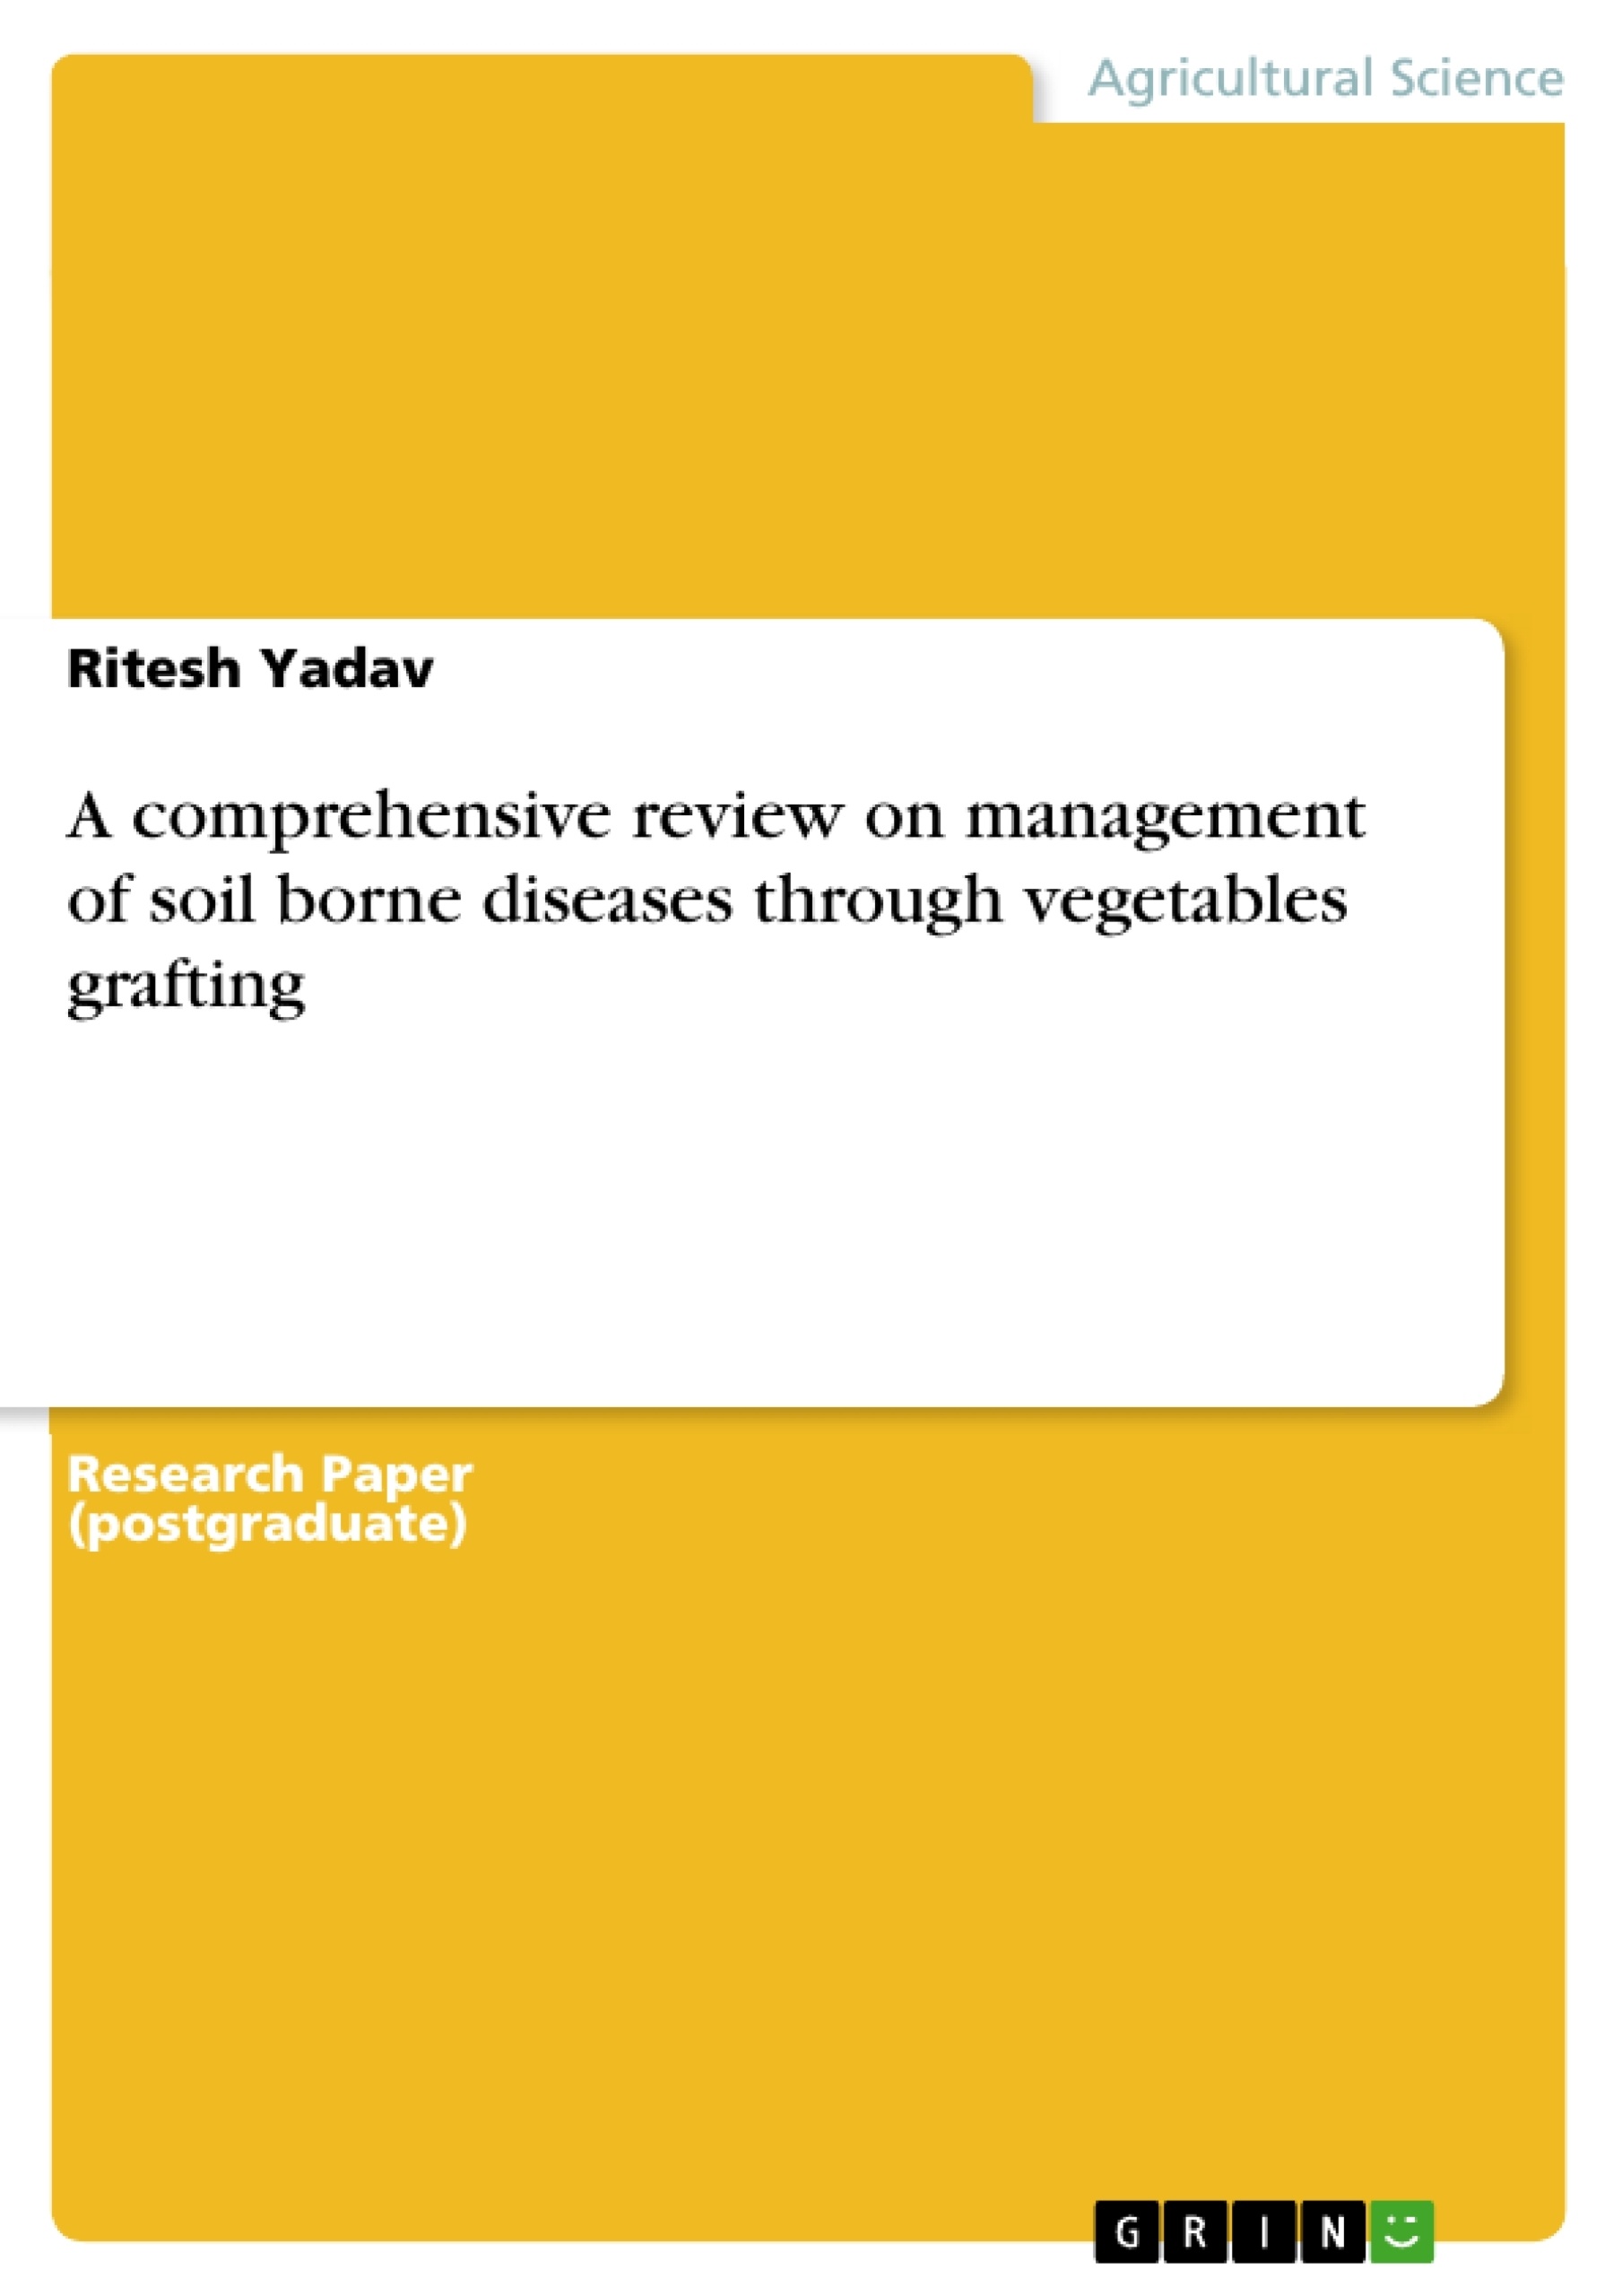 Title: A comprehensive review on management of soil borne diseases through vegetables grafting